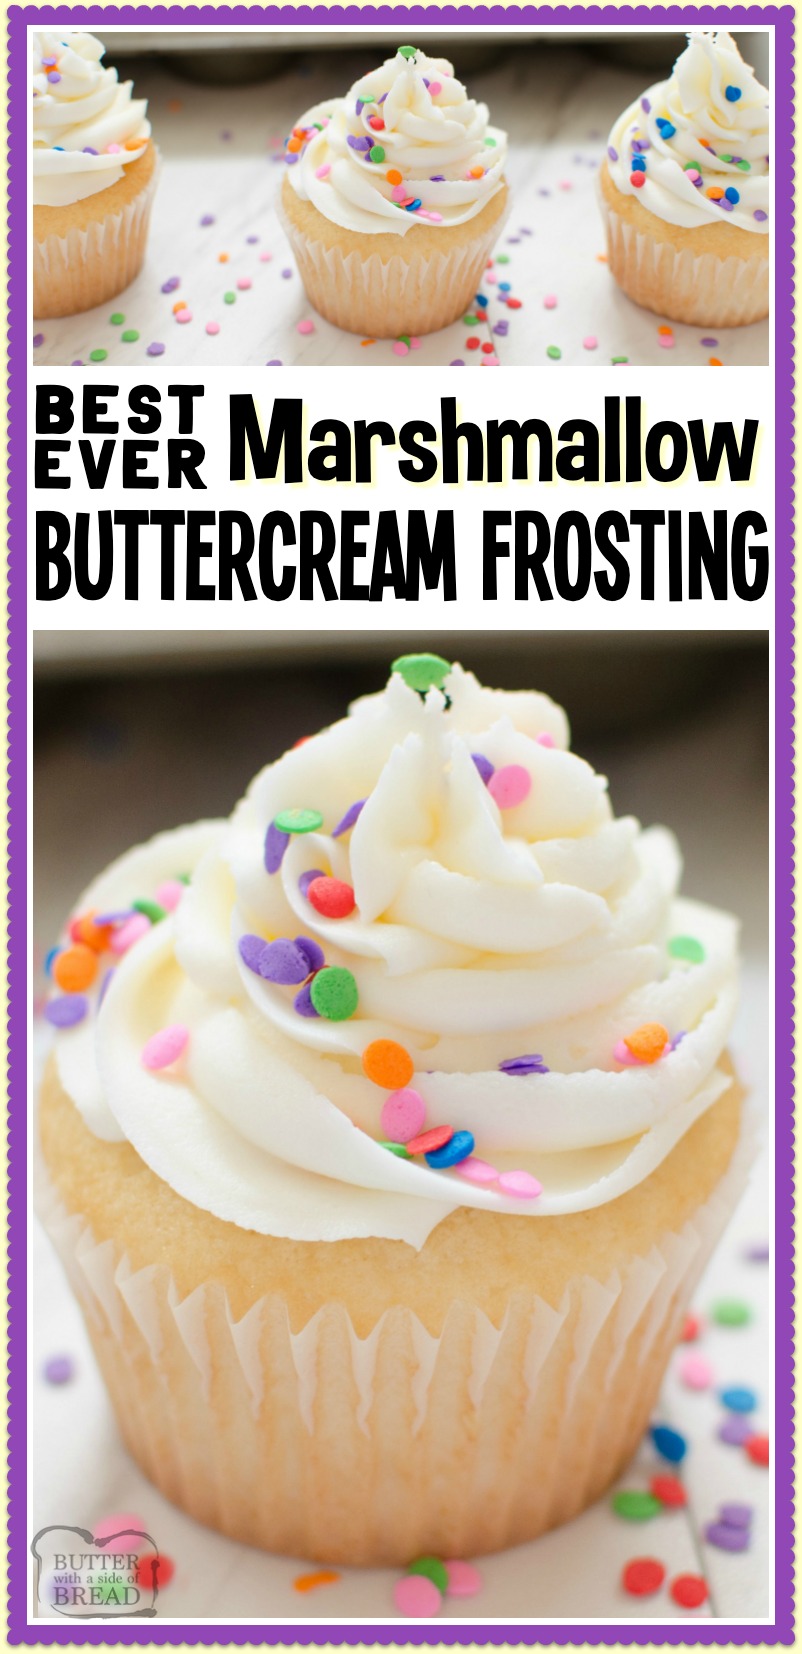 Best Ever Marshmallow Buttercream Frosting is the most delicious homemade buttercream frosting recipe you'll ever taste! Made in minutes with just 5 ingredients; everyone adores this marshmallow buttercream recipe. #frosting #buttercream #butter #marshmallow #baking #dessert #recipe from BUTTER WITH A SIDE OF BREAD